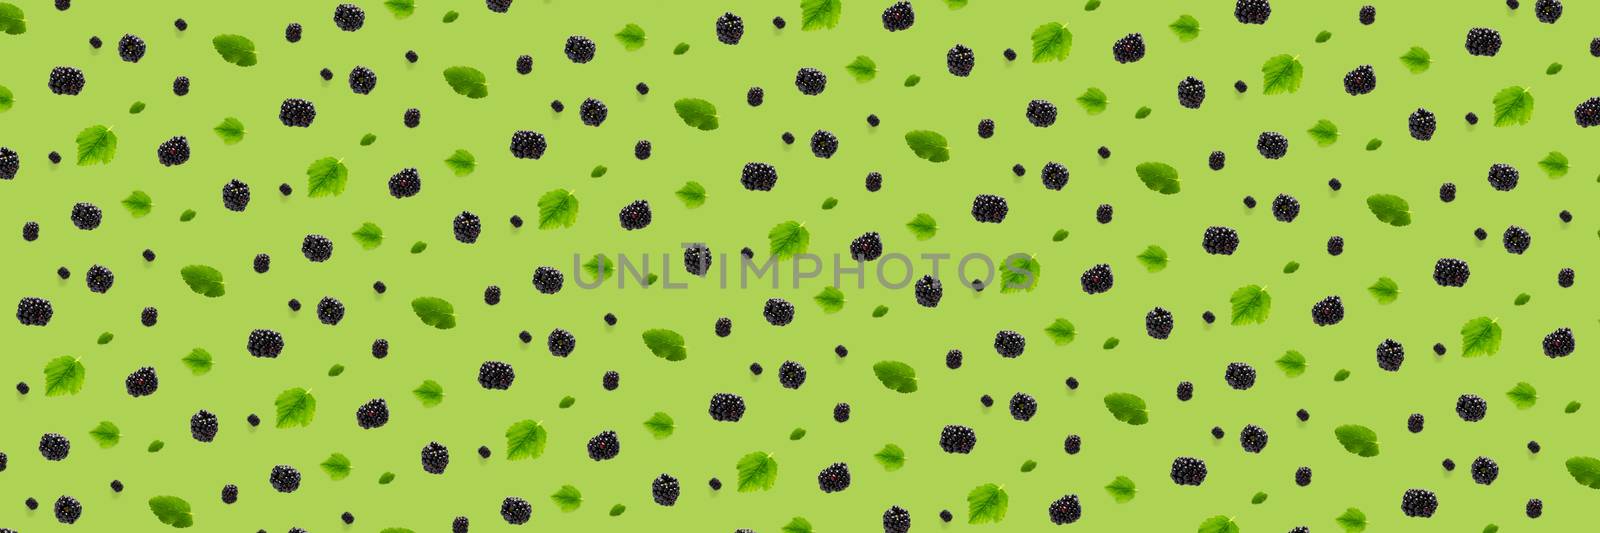 Background from isolated brambles. Group of tasty ripe blackberry isolated on green background. modern backround of falling blackberry or bramble. by PhotoTime